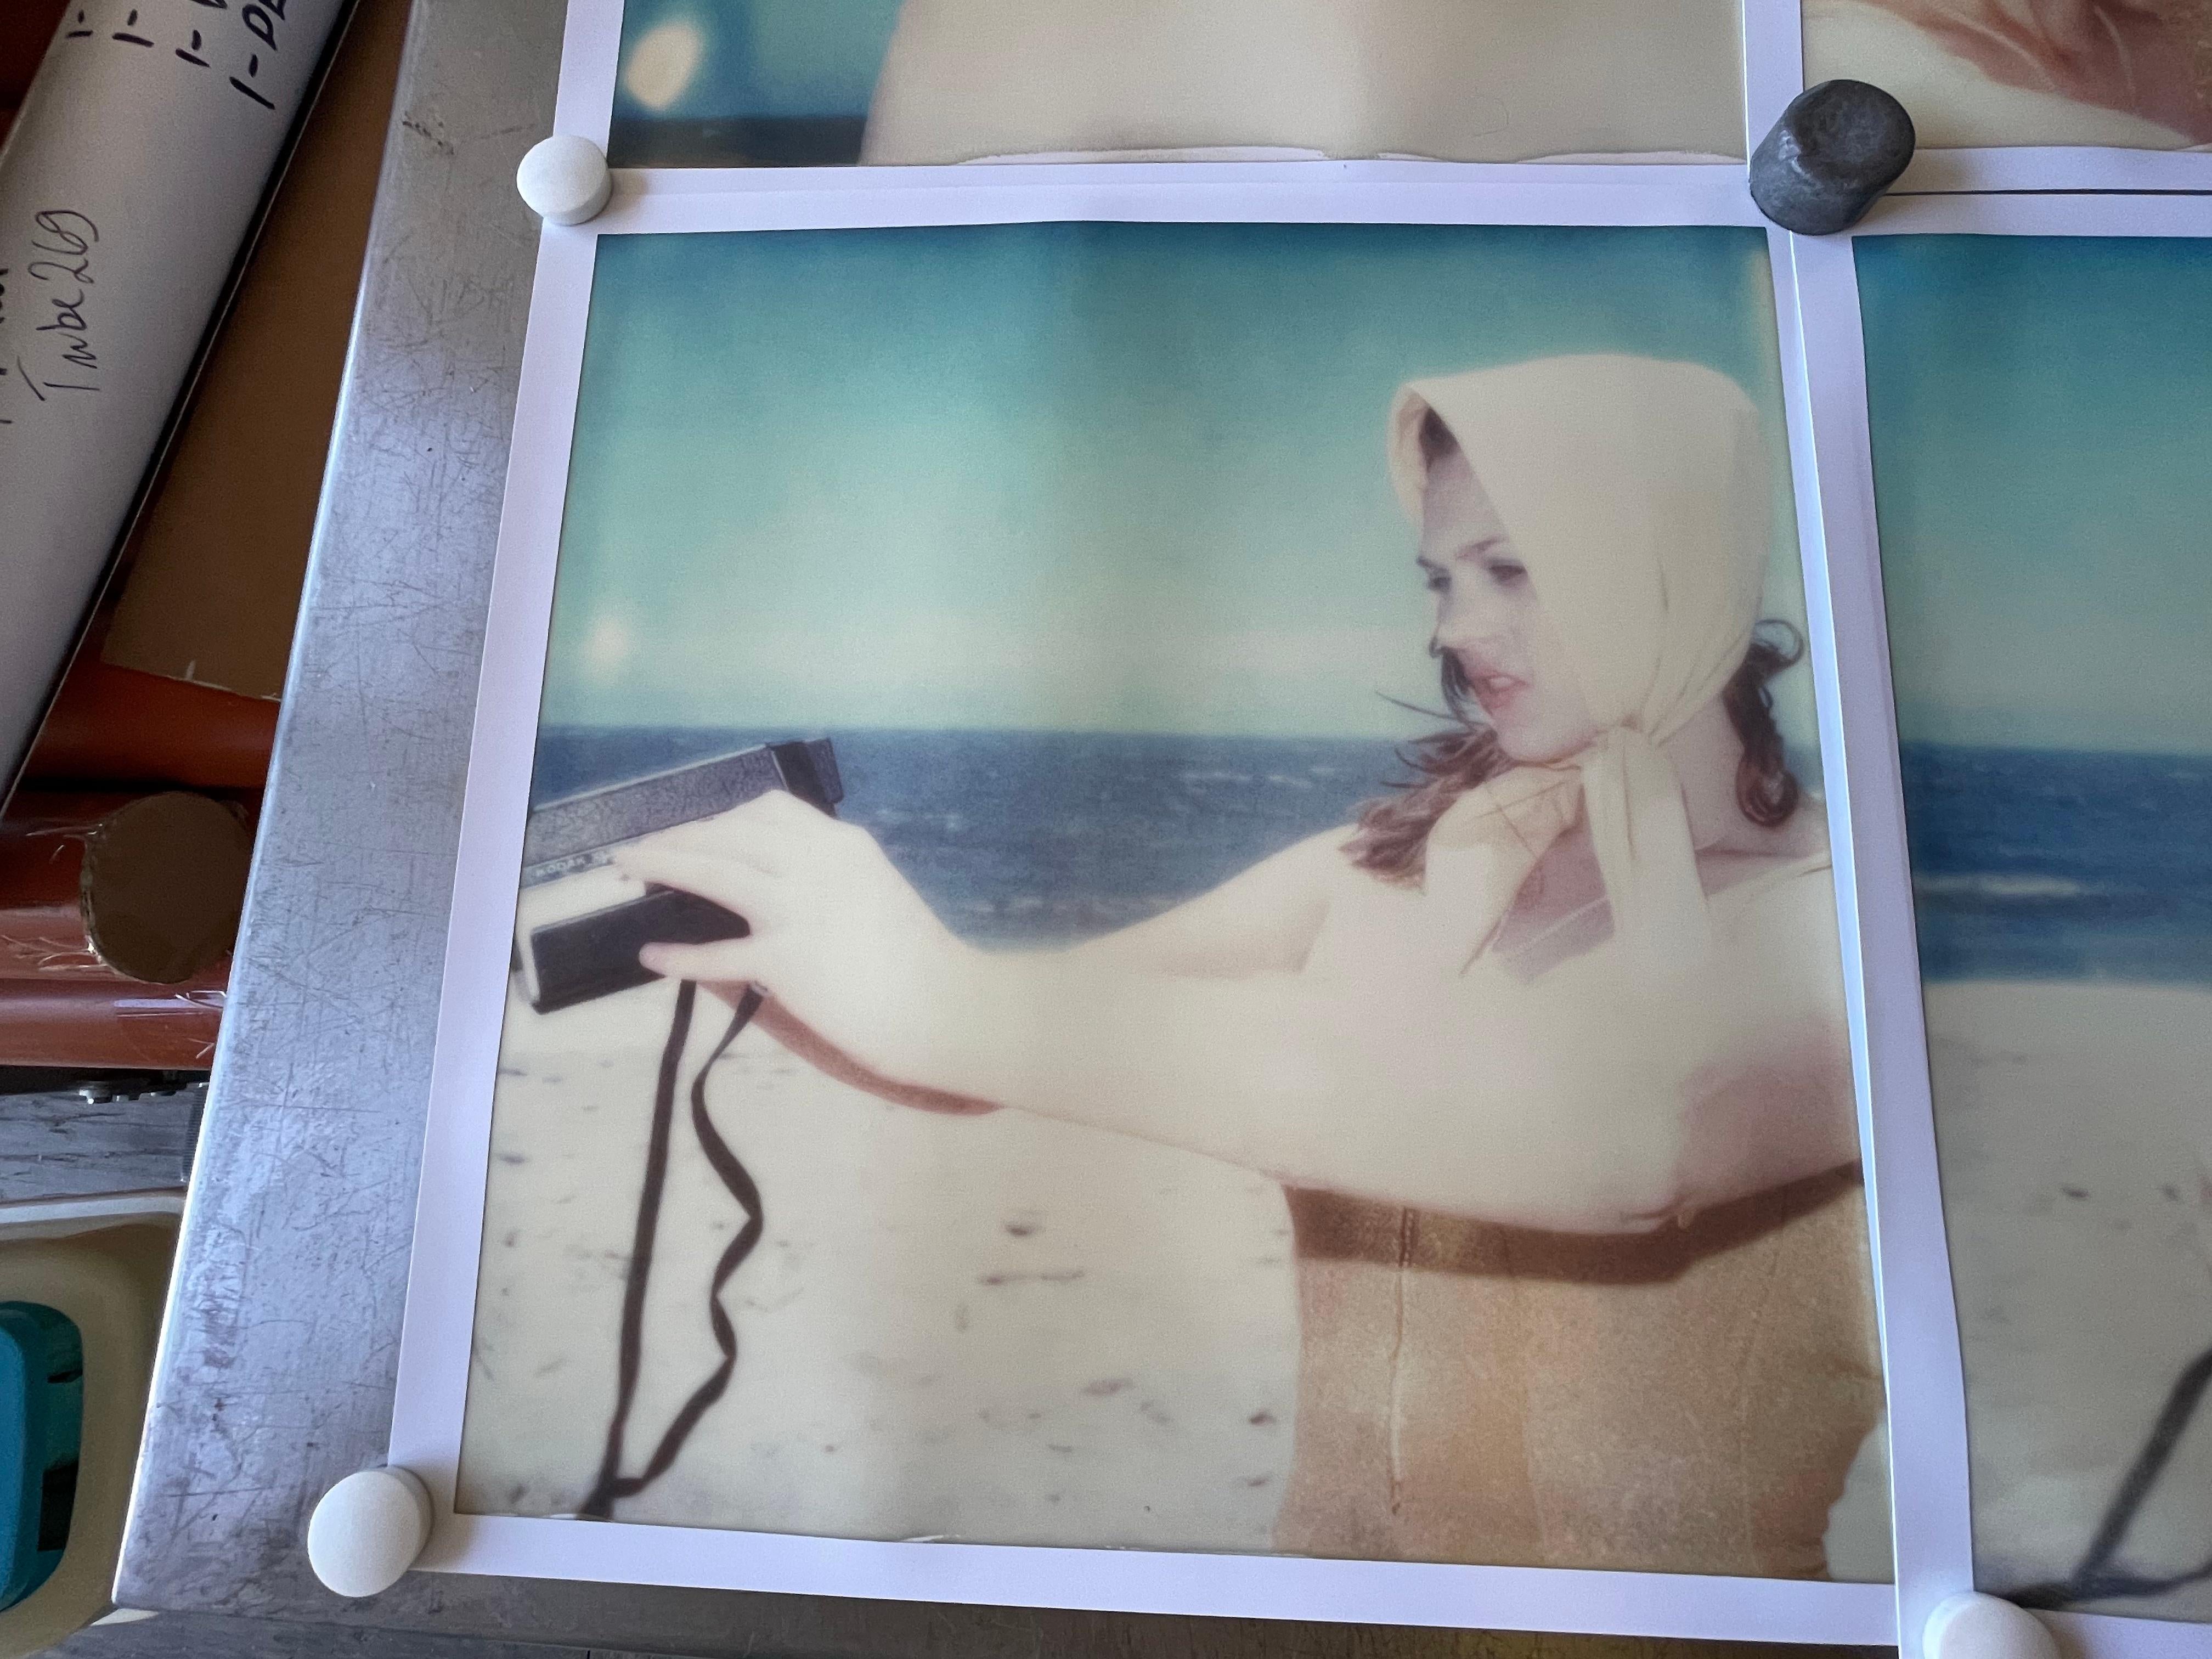 The Diva and the Boy (Beachshoot) - 9 pieces - Polaroid, Vintage, Contemporary For Sale 7